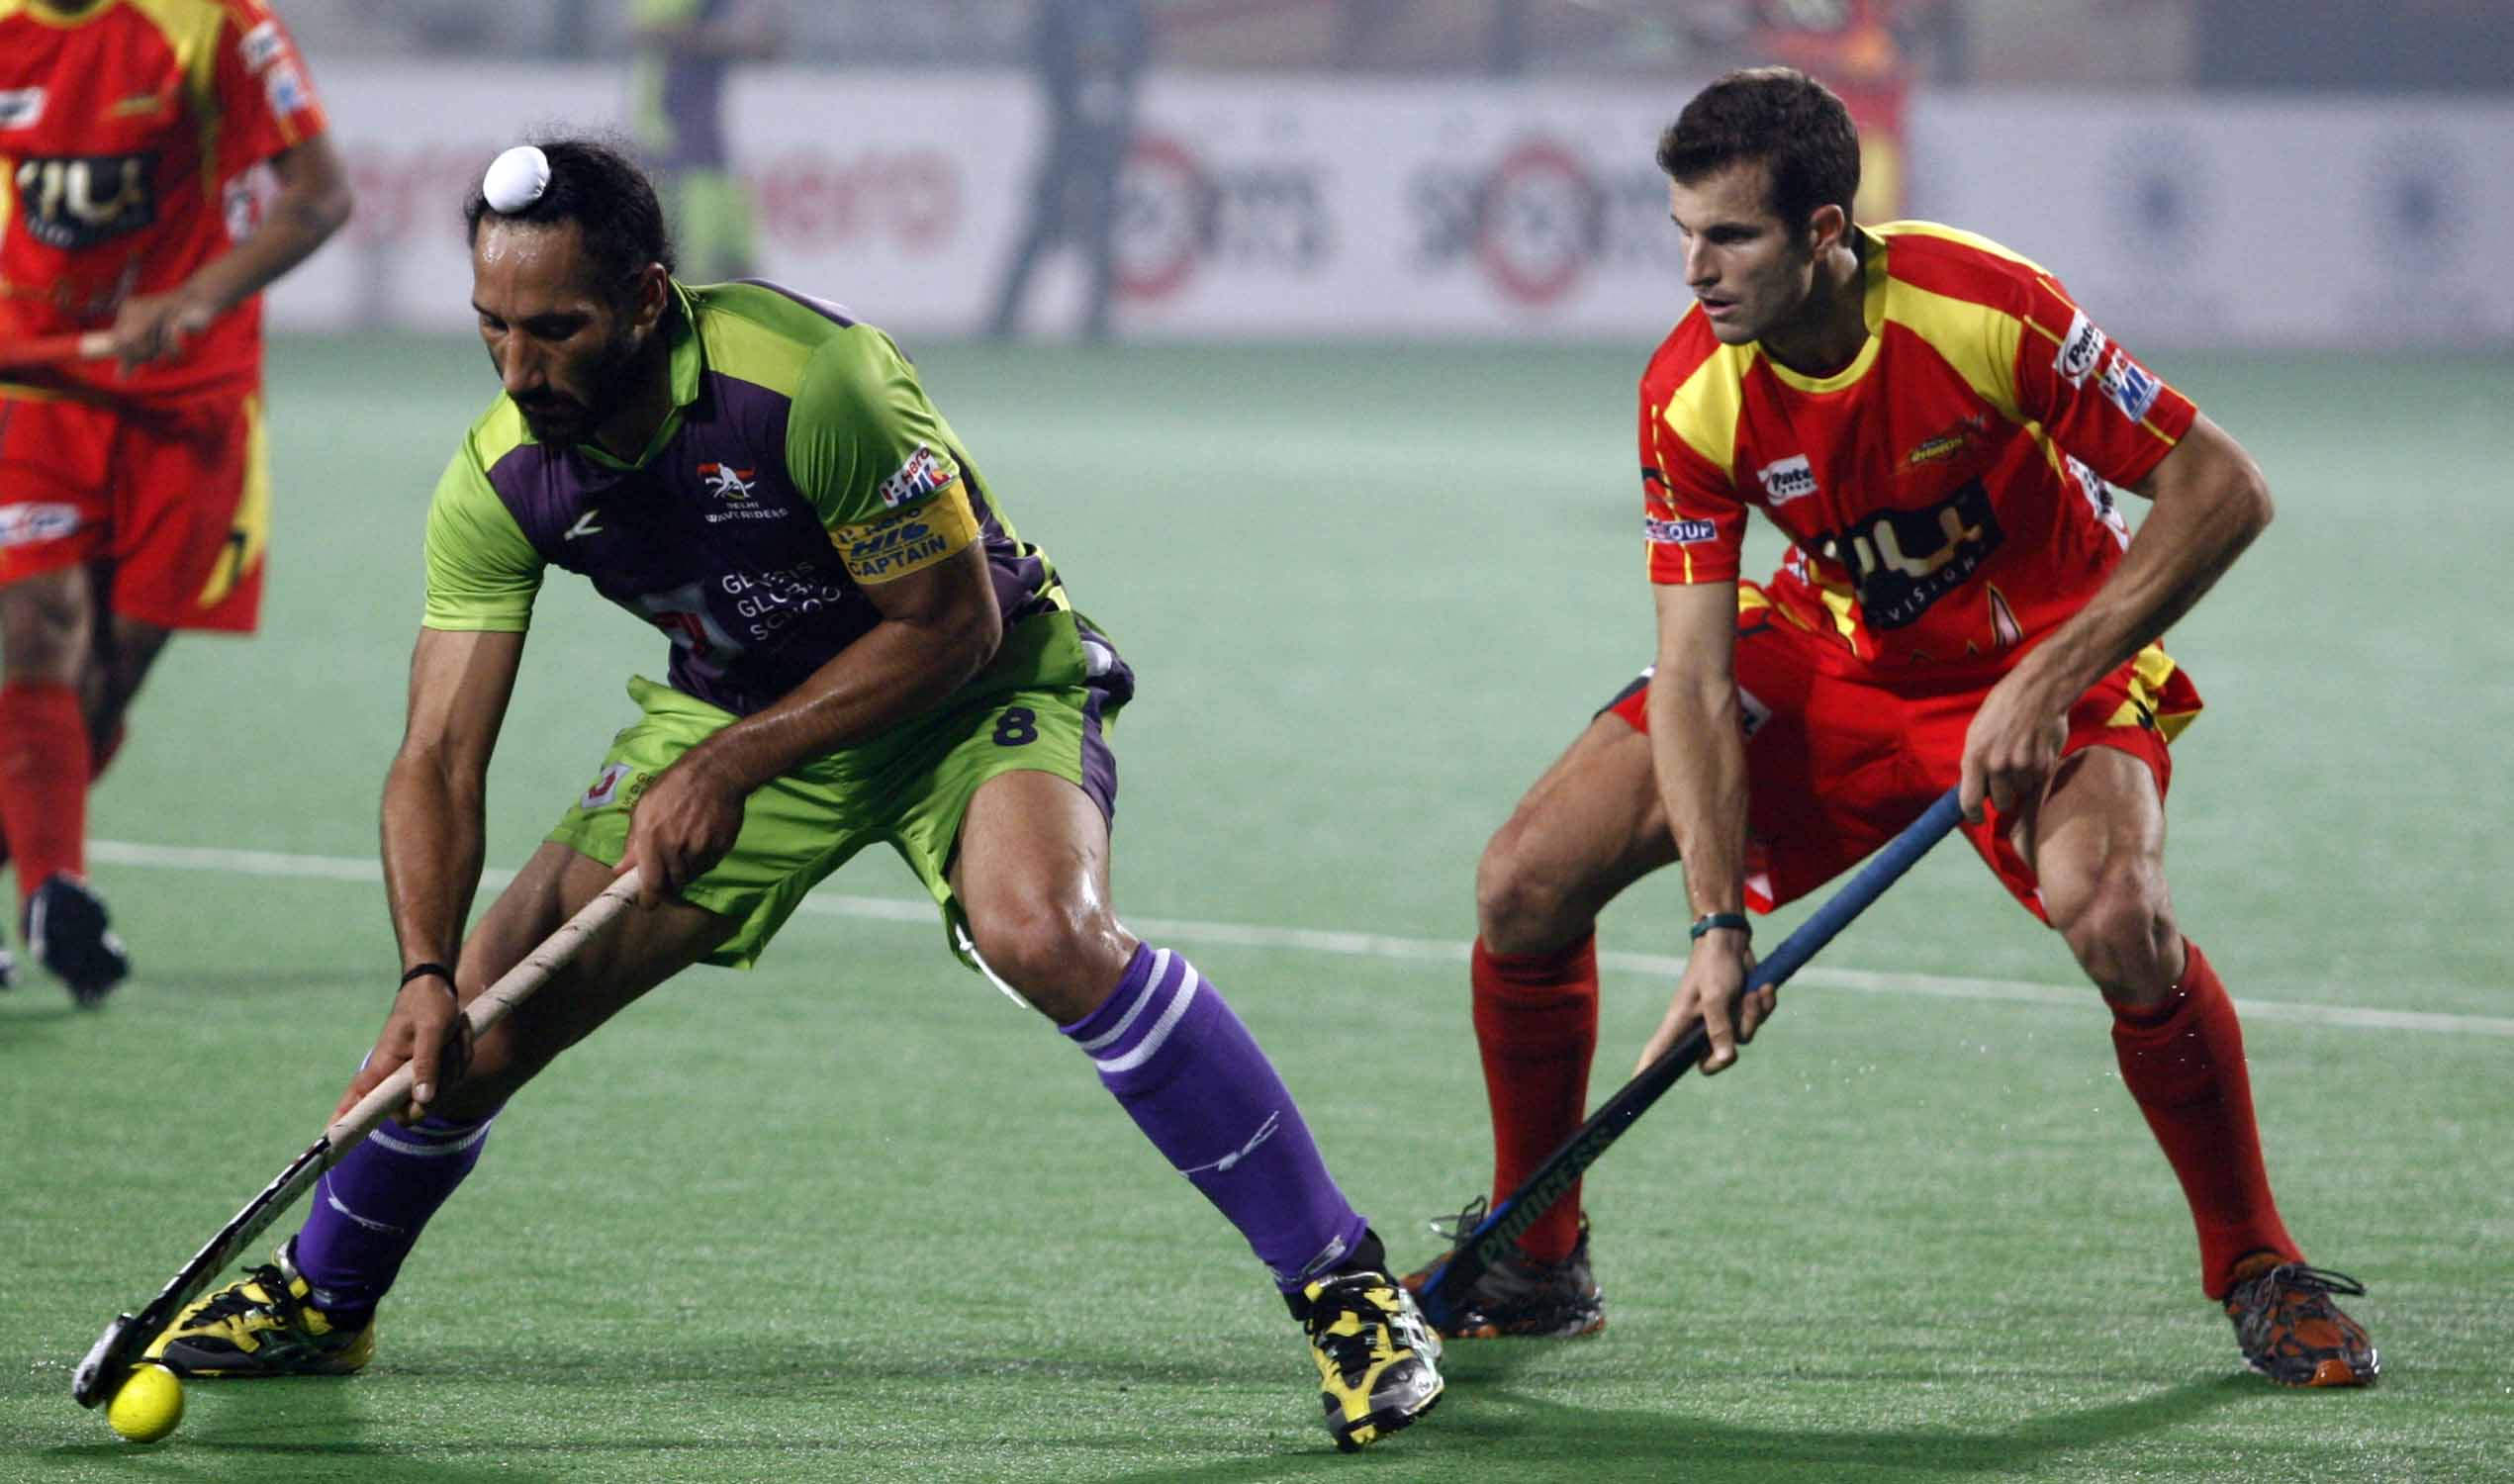 Sardar Singh In Action During The Match